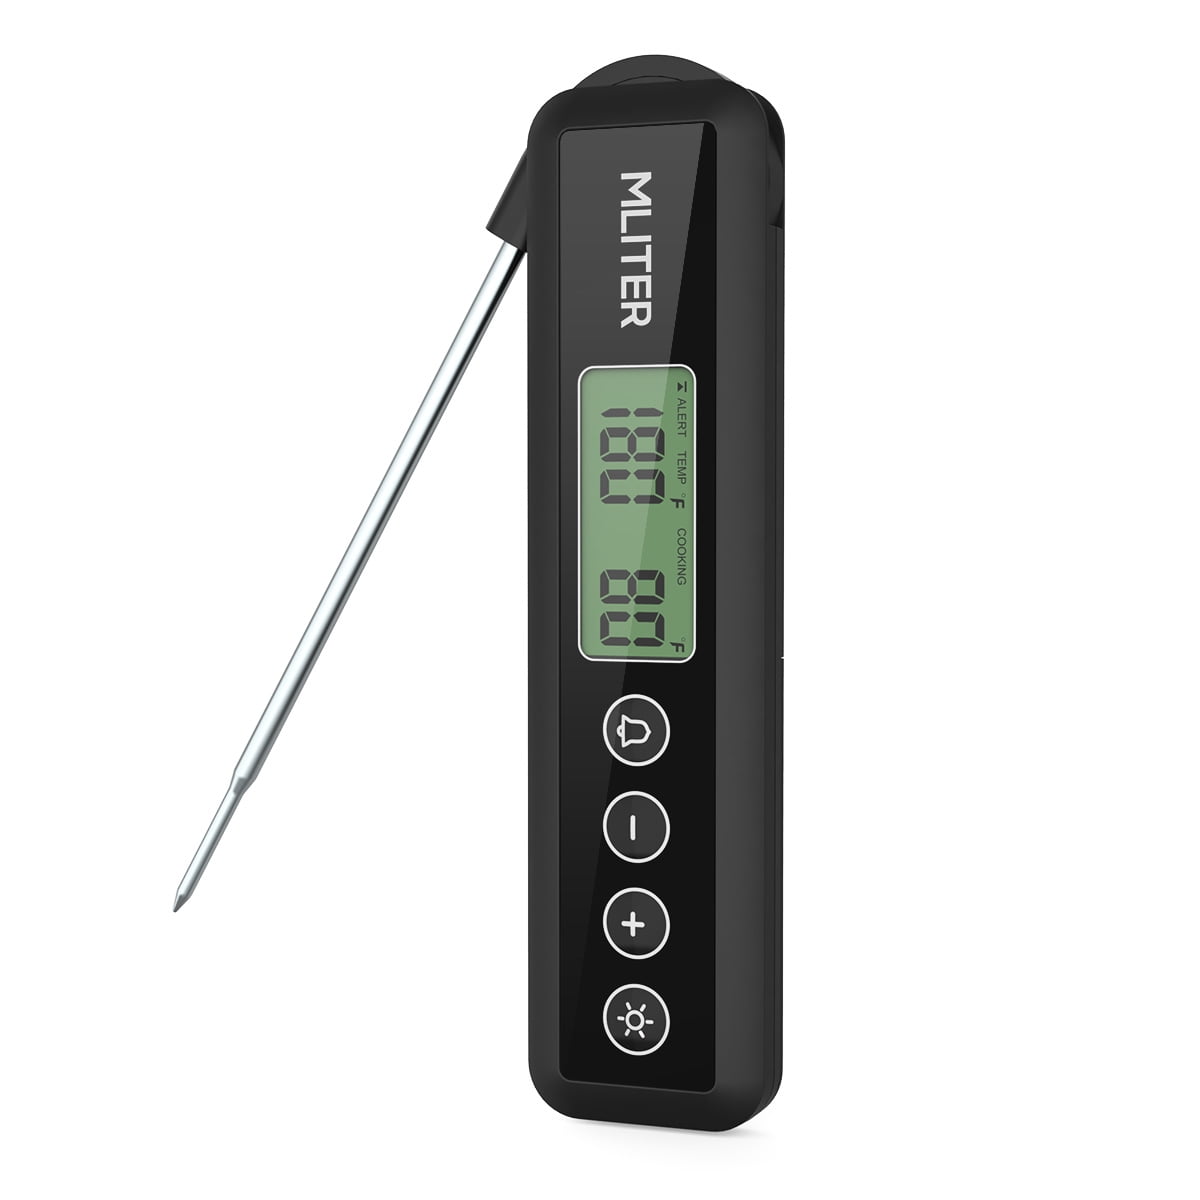 Instant Digital Meat Thermometer With Target Setting Alert and